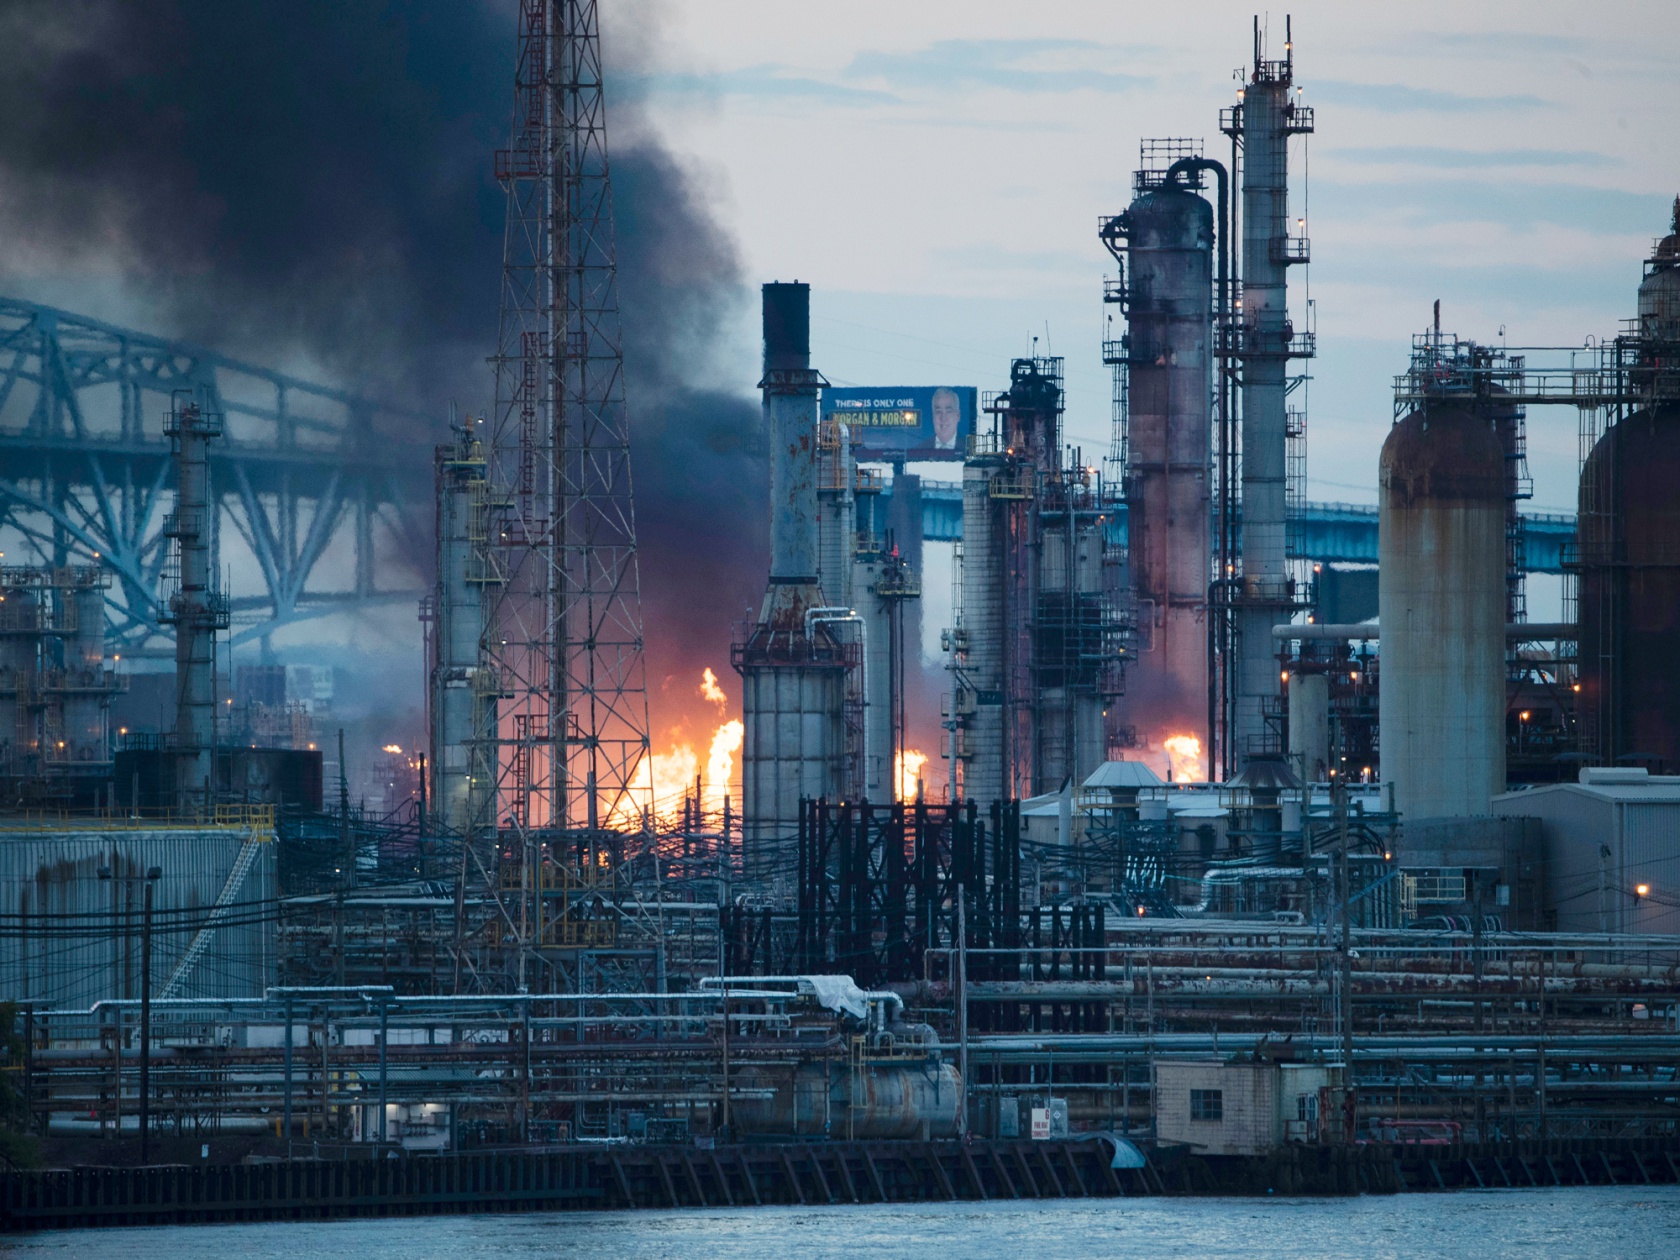 Philadelphia Refinery Explosion So Hot It's Spotted From Space Bloomberg